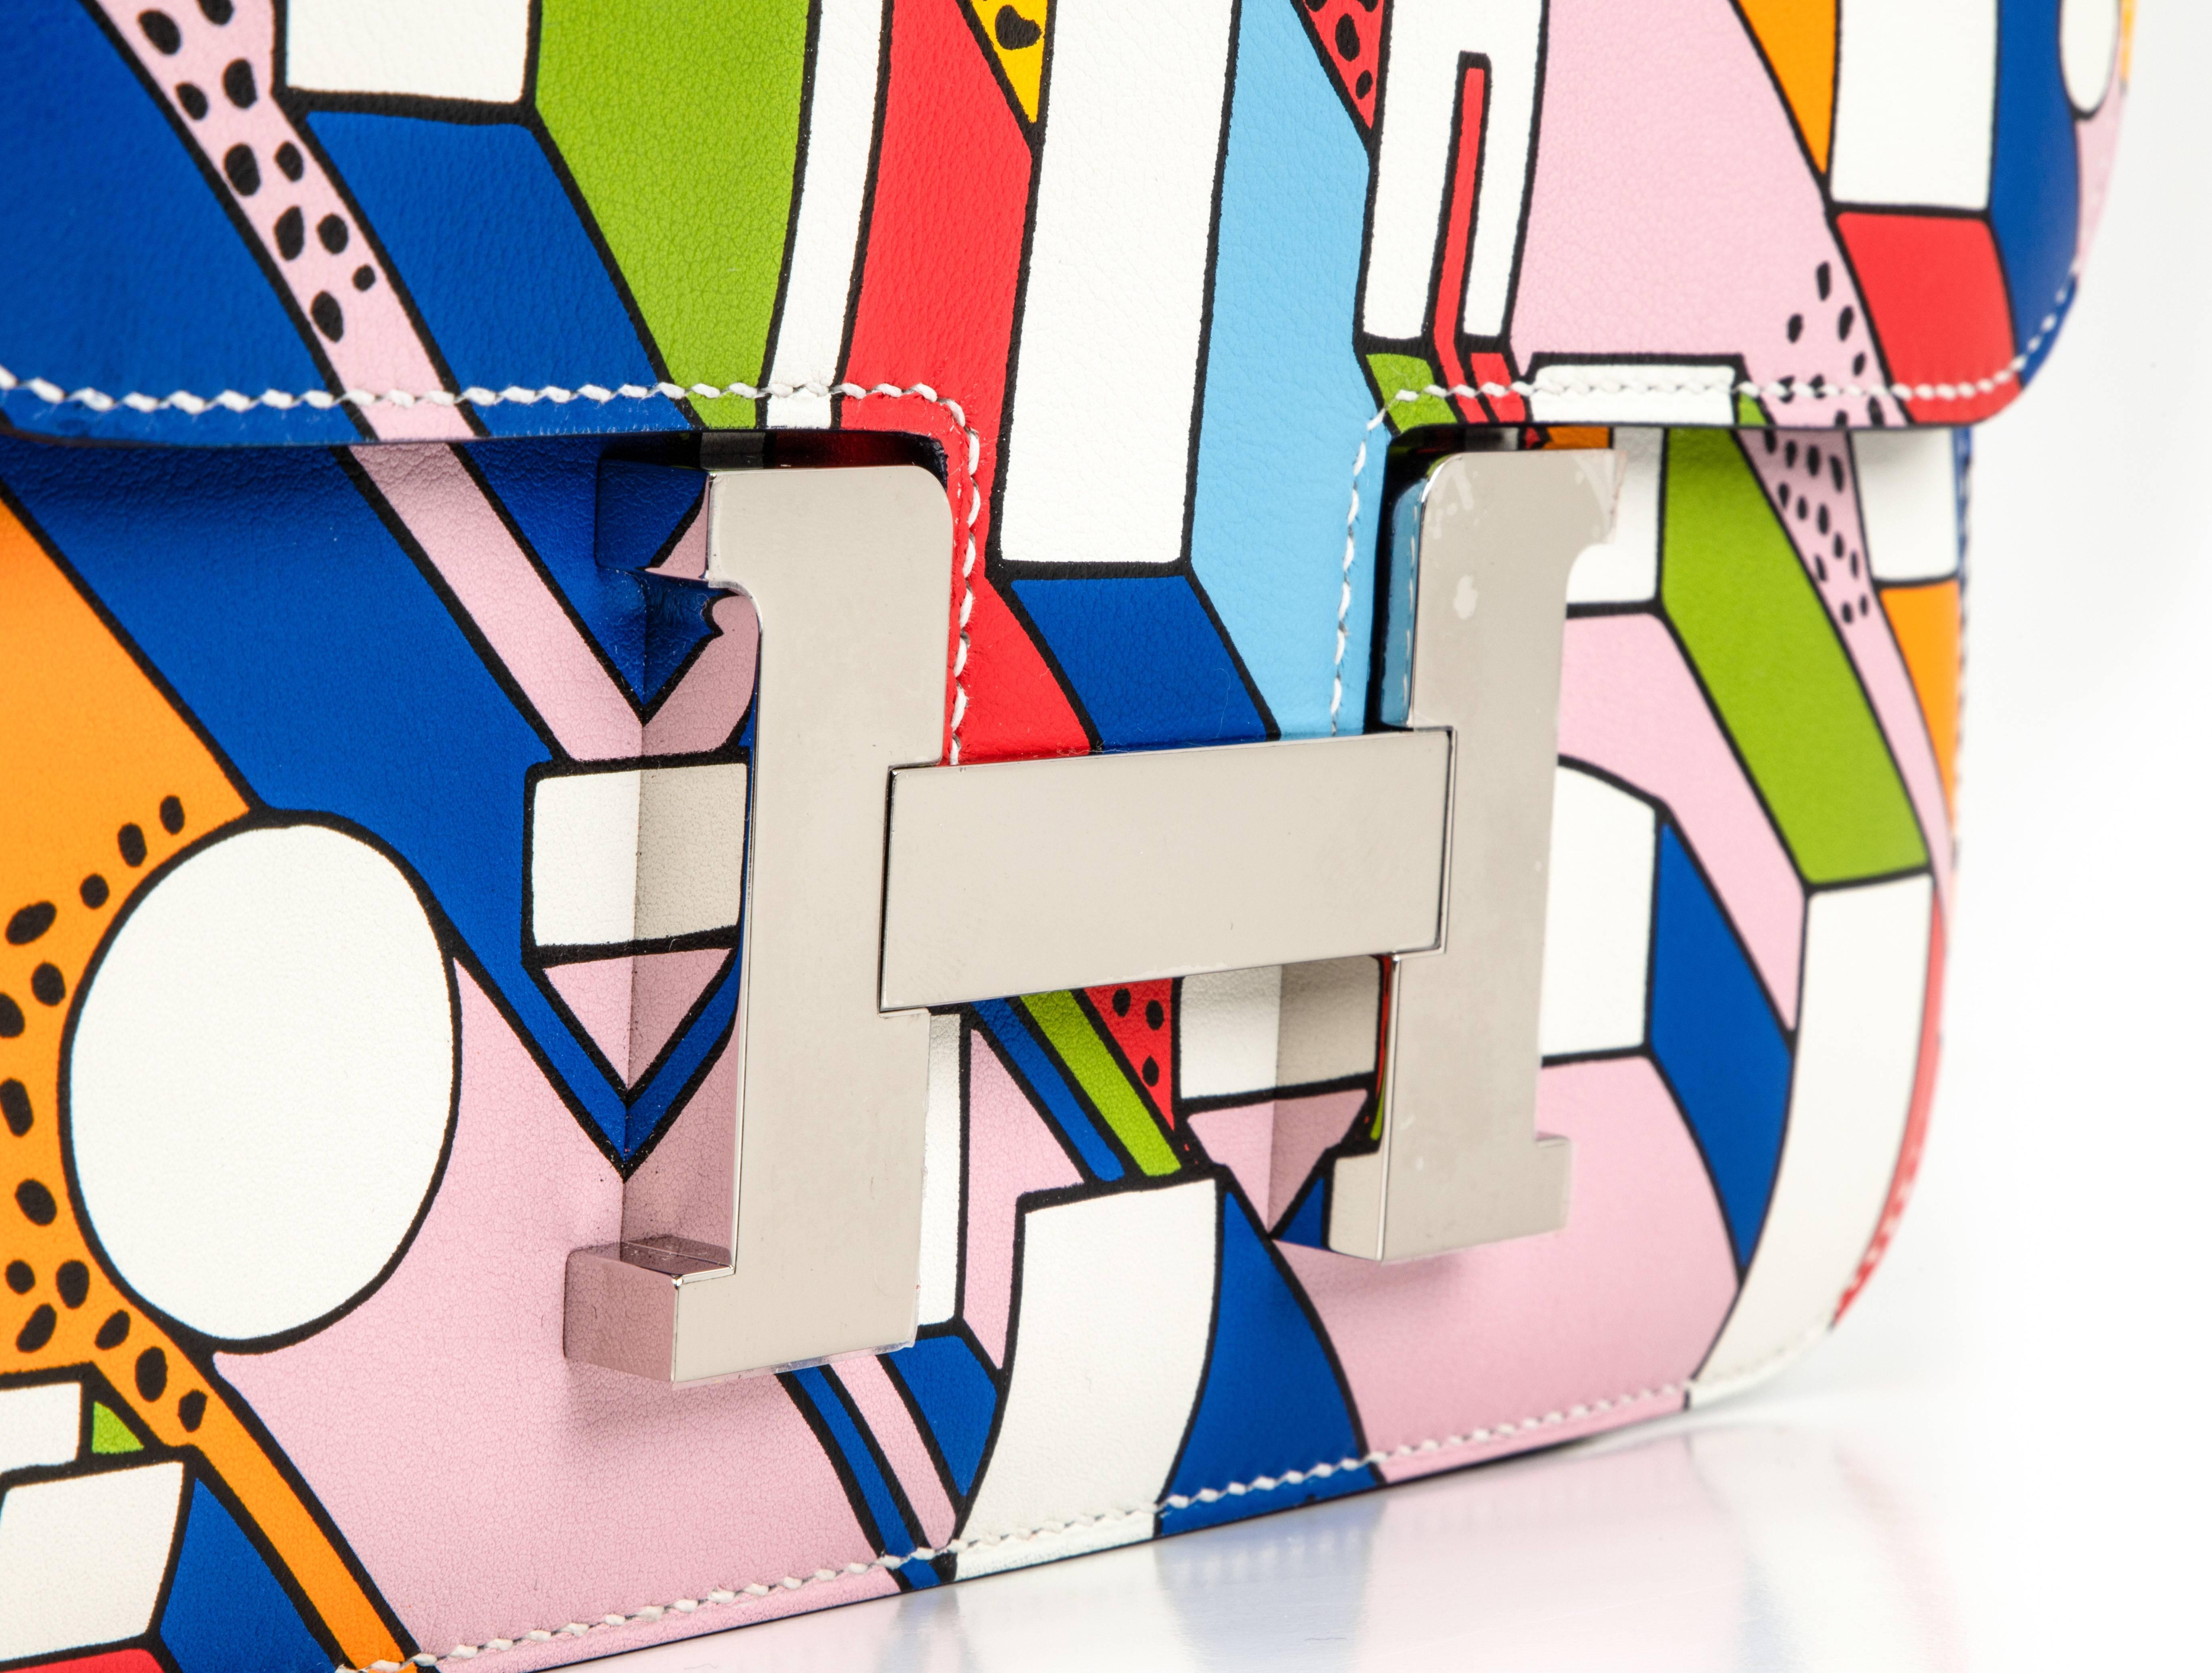 Guaranteed authentic Limited Edition Hermes 24 Constance On a Summer's Day collaborated with artist Nigel Peake is a vivid abstract in soft pinks, warm yellow, orange, black, red, blues and white.
A beautiful and striking creation for the summer and